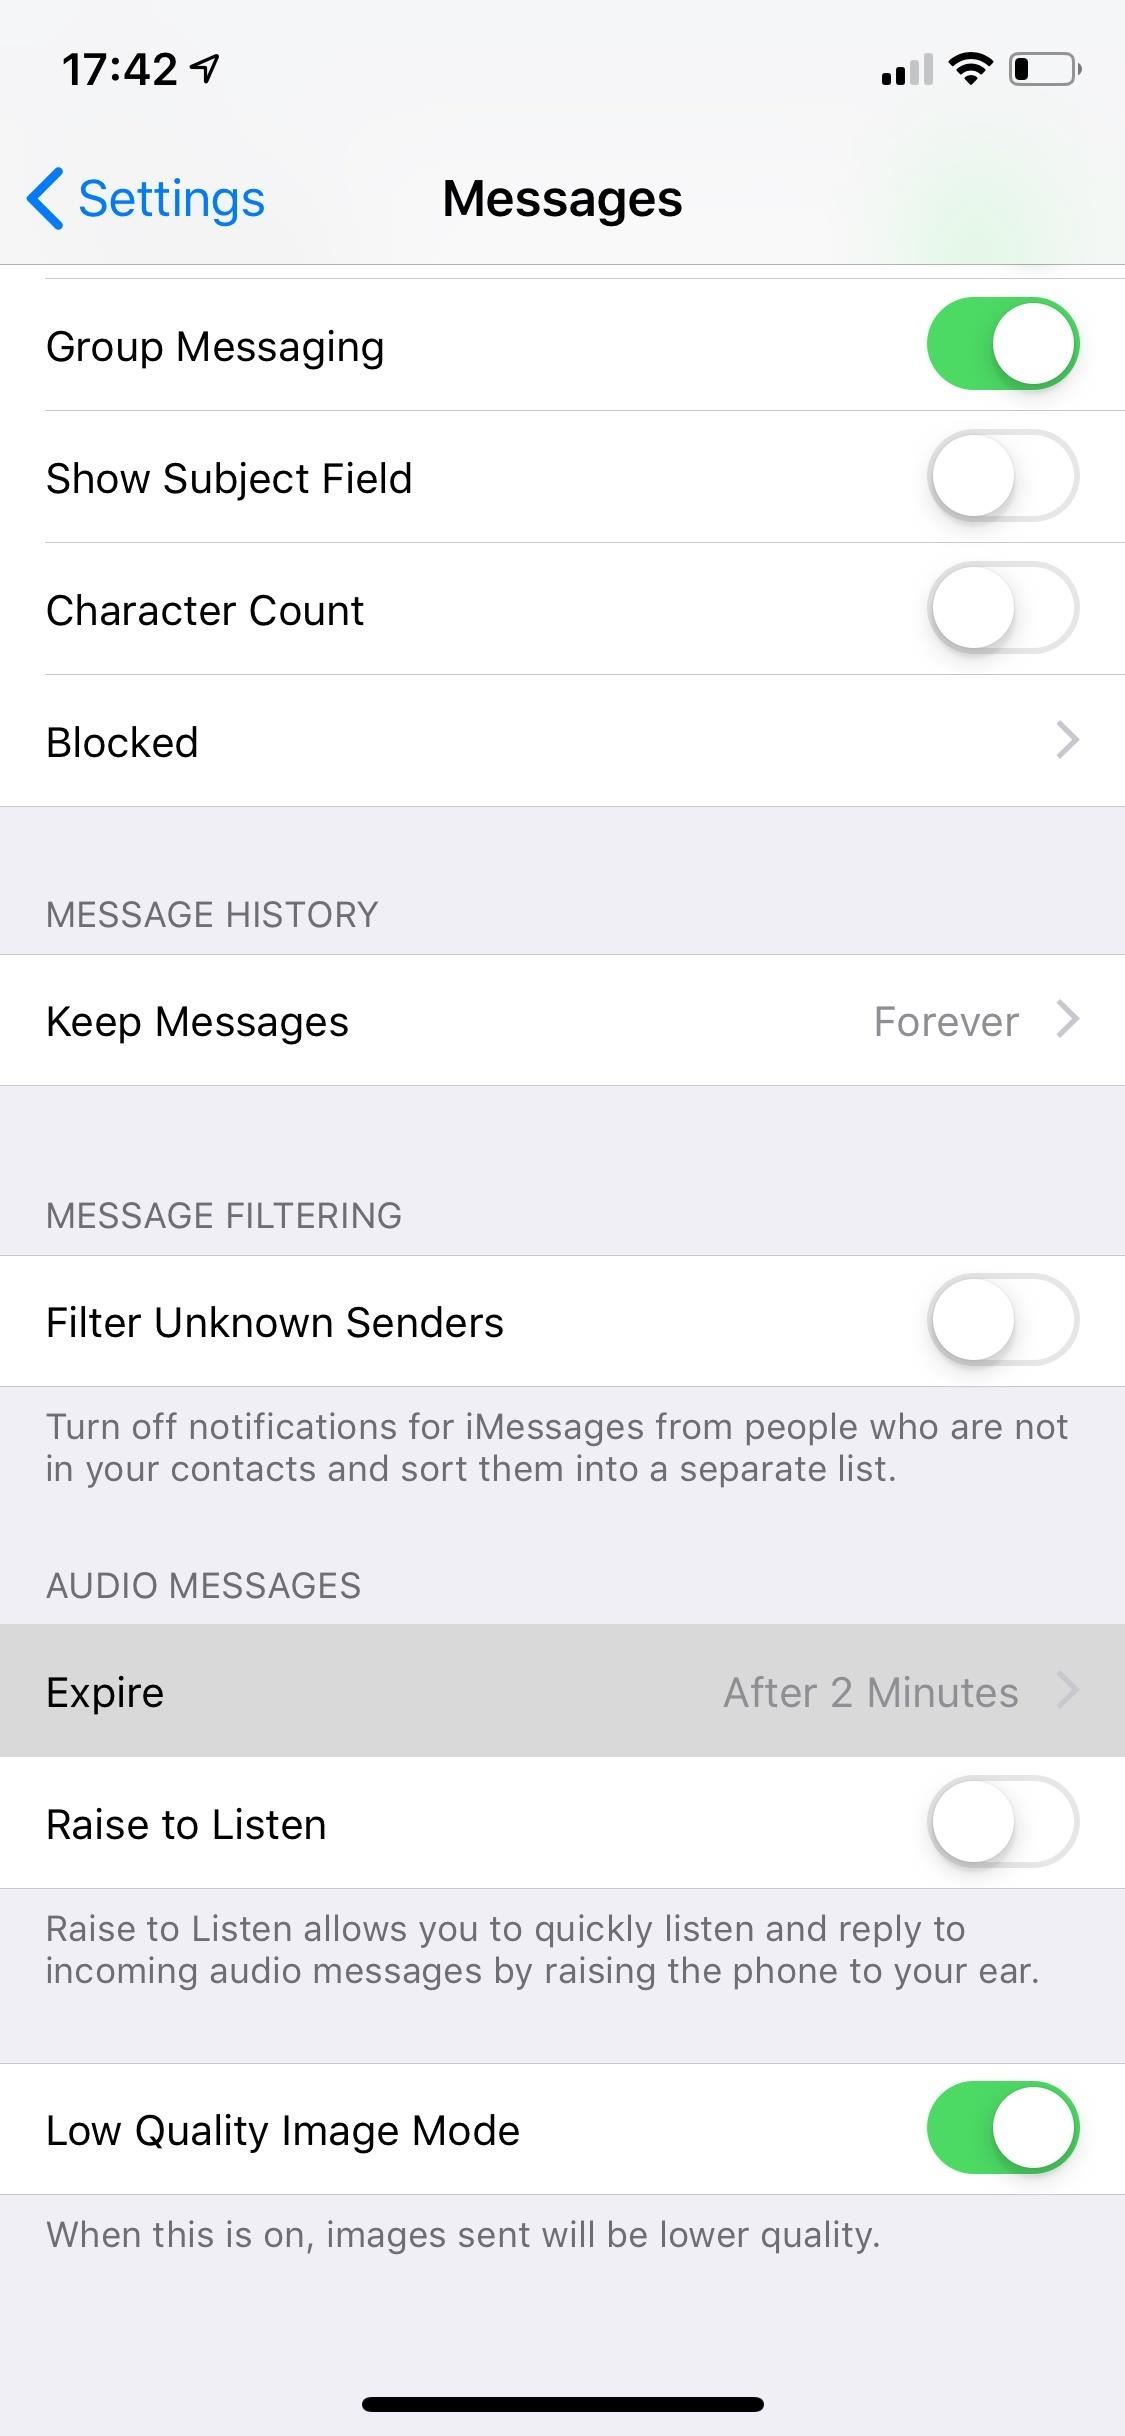 How to Stop Audio Messages from Self-Destructing in iMessage So You Can Keep Them Forever